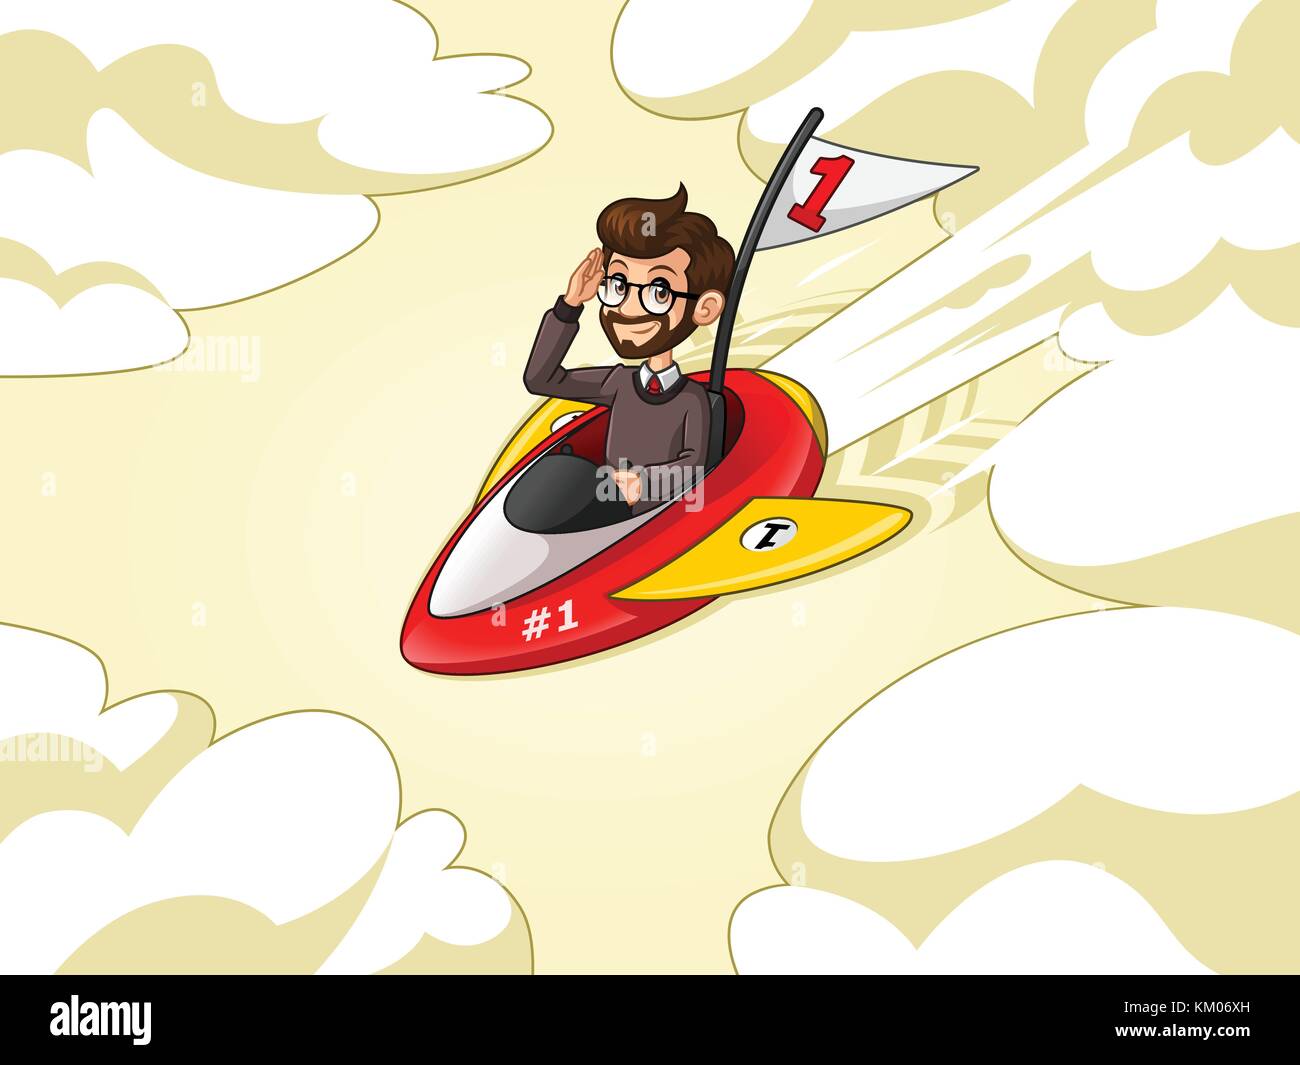 Hipster businessman cartoon character design riding a rocket with number one flag flying through the sky, against cream background. Stock Vector